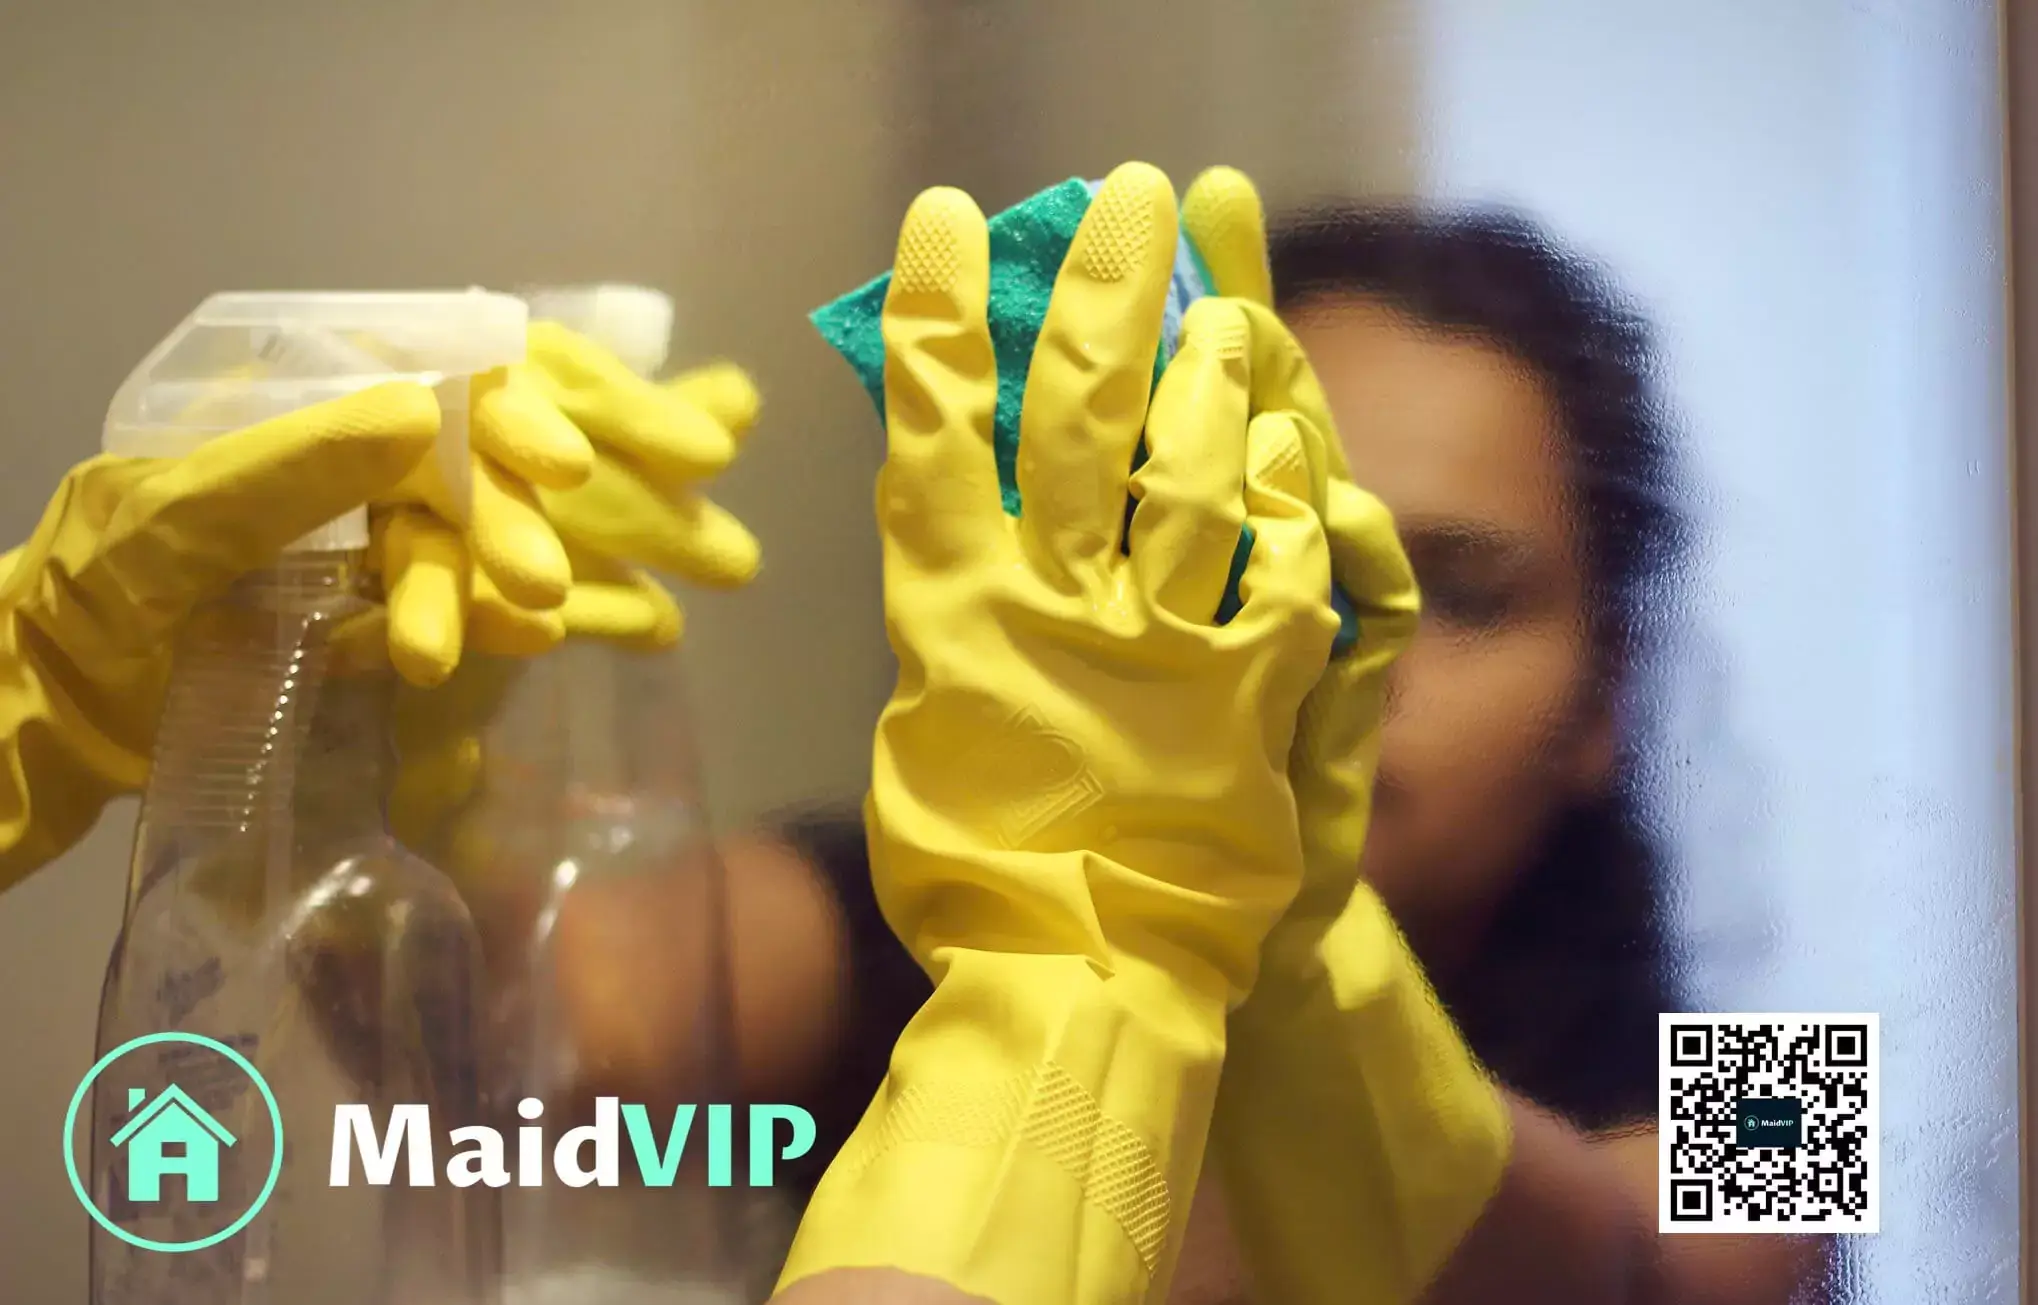 Maid VIP Burbank Deep Cleaning Services